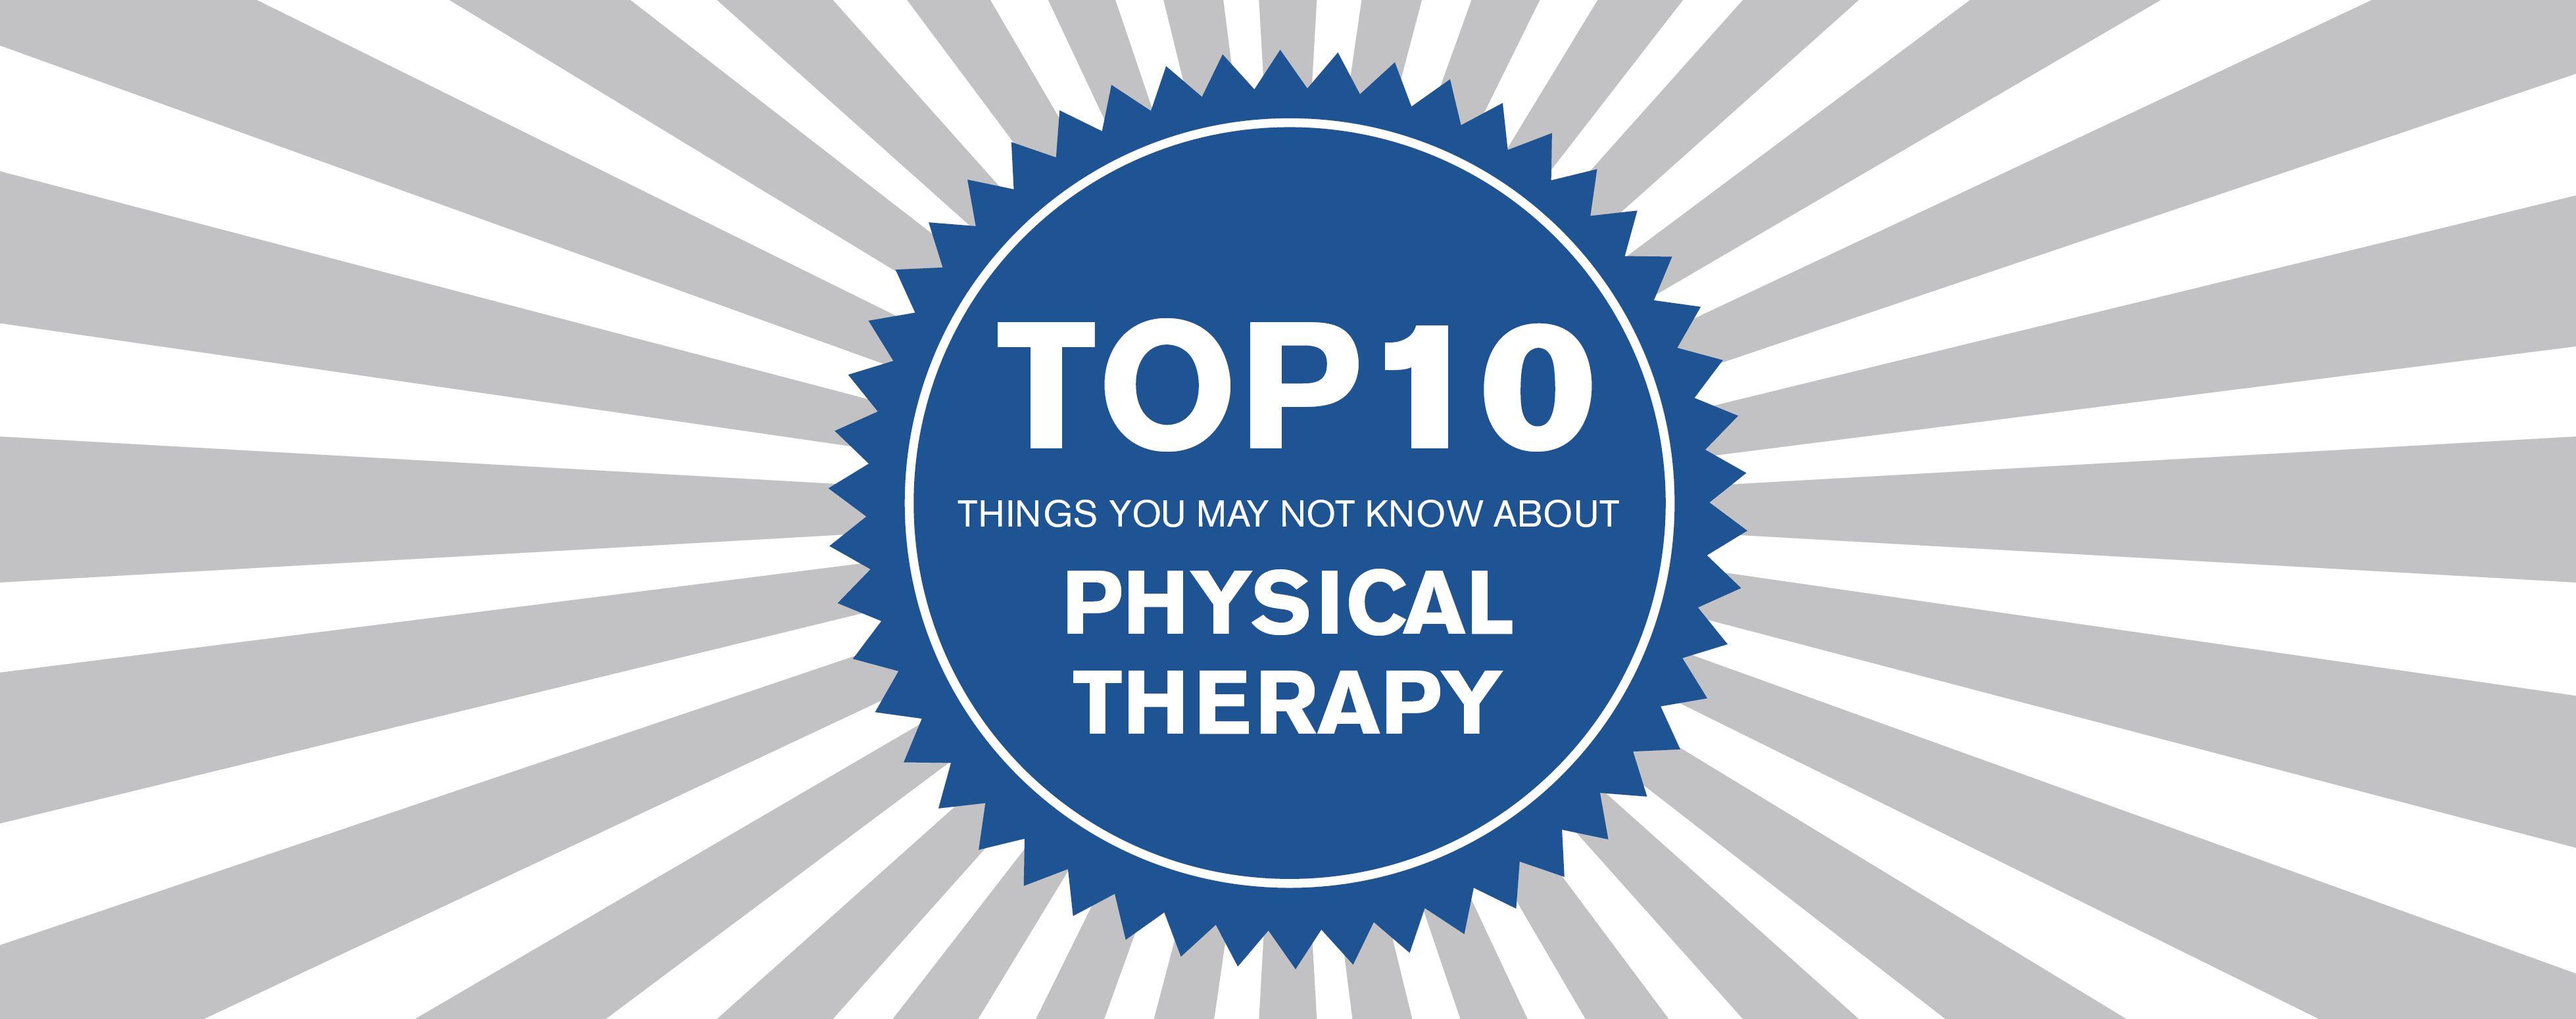 P. Physical Therapy Month Logo - The Things You Did Not Know About Physical Therapy